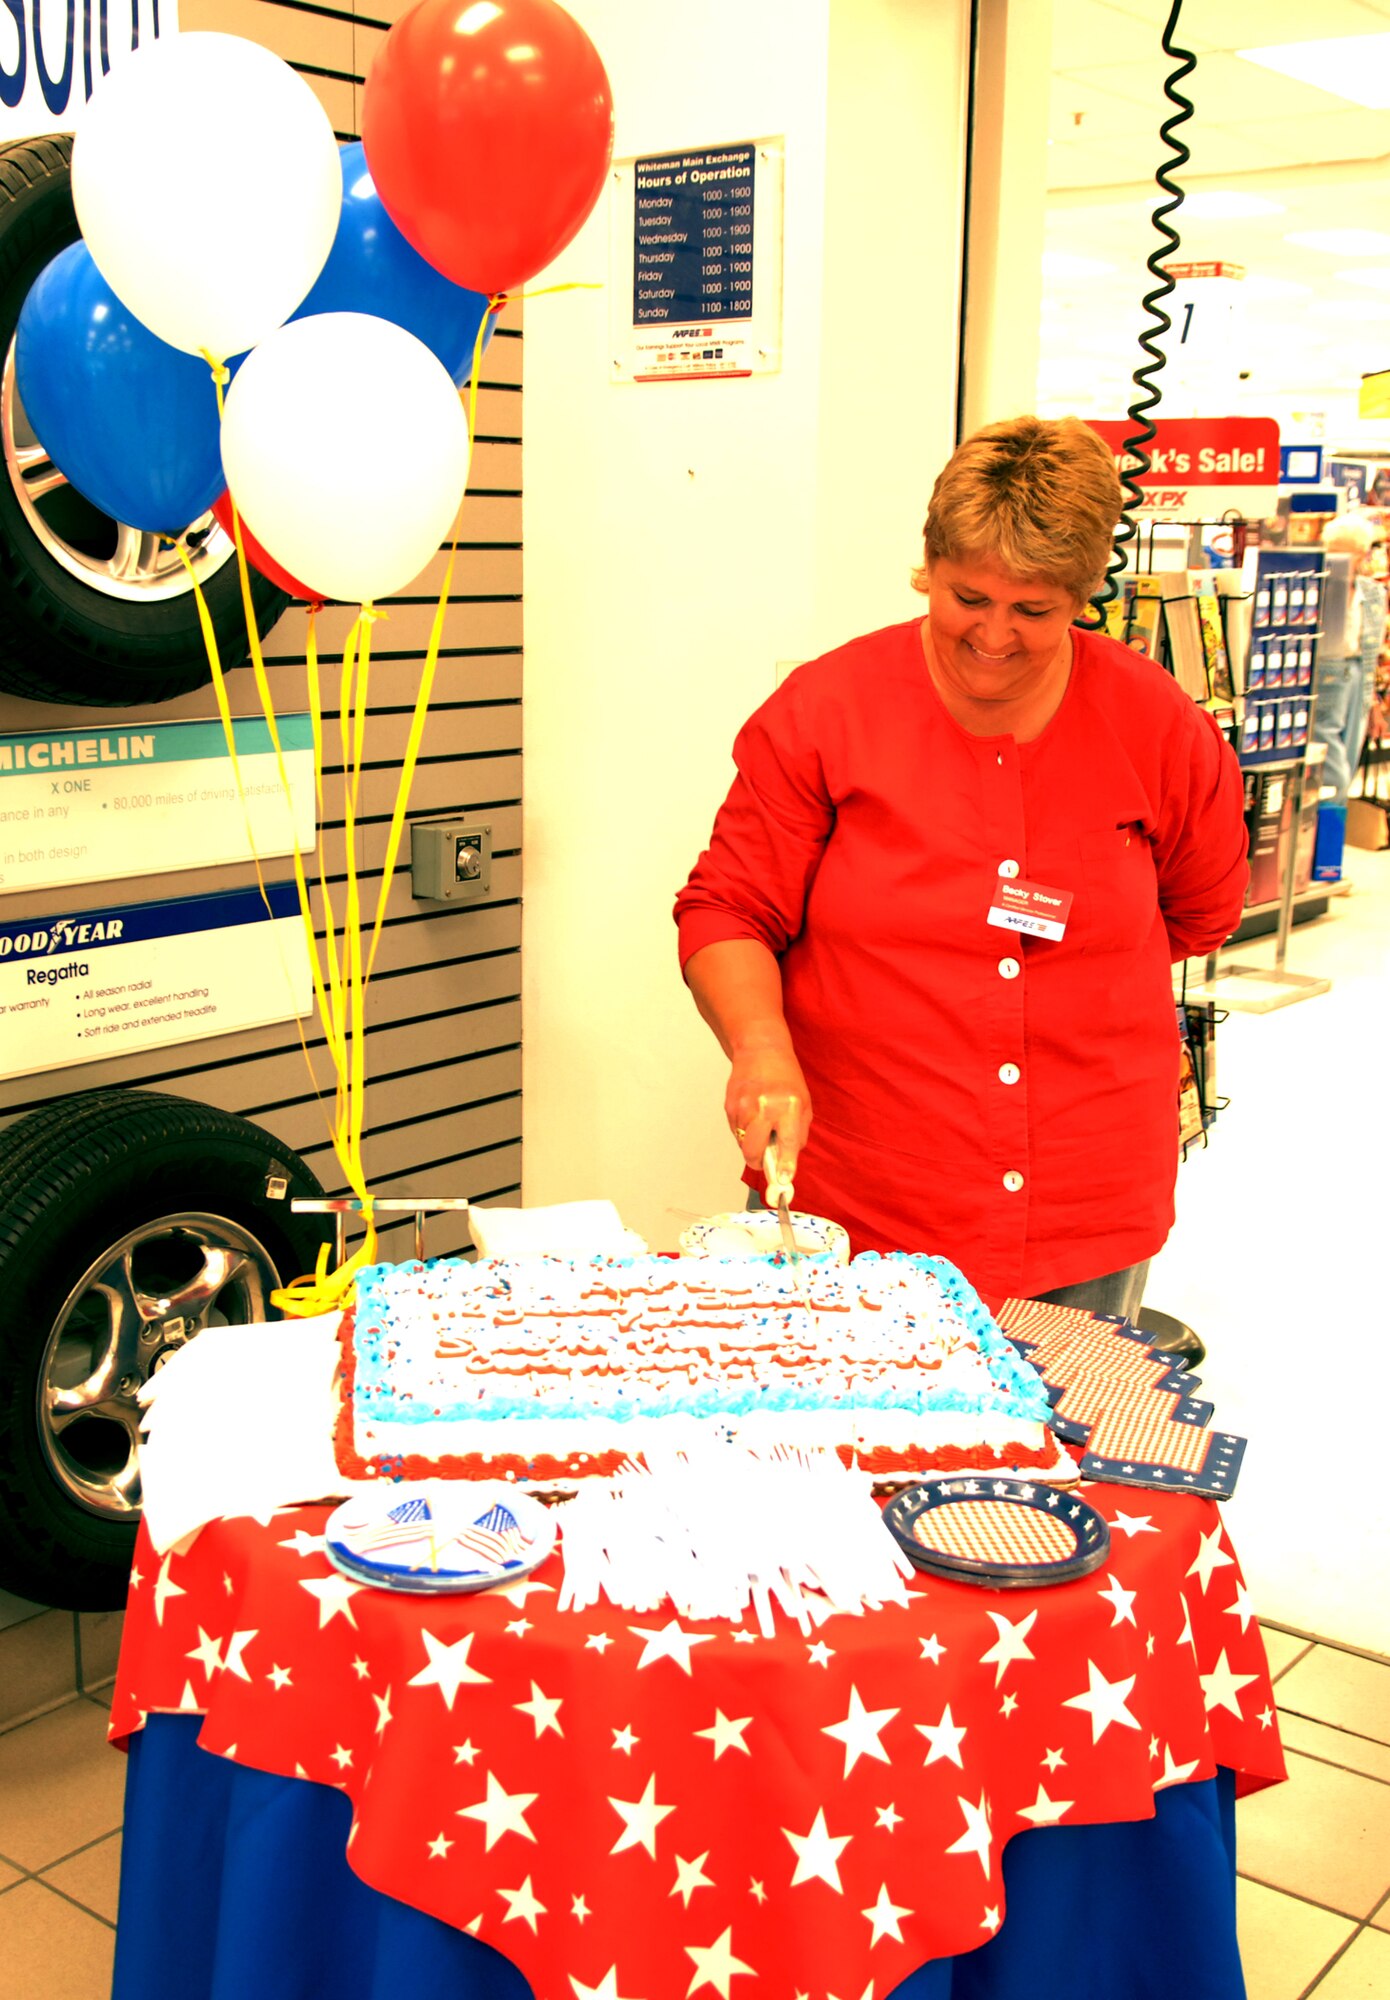 WHITEMAN AIR FORCE BASE, Mo. -- Becky Stover, Whiteman Base Exchange manager, cuts the Army and Air Force Exchange Services’ 112th anniversary cake at the Whiteman BX July 25. (U.S. Air Force photo/Airman 1st Class Stephen Linch)